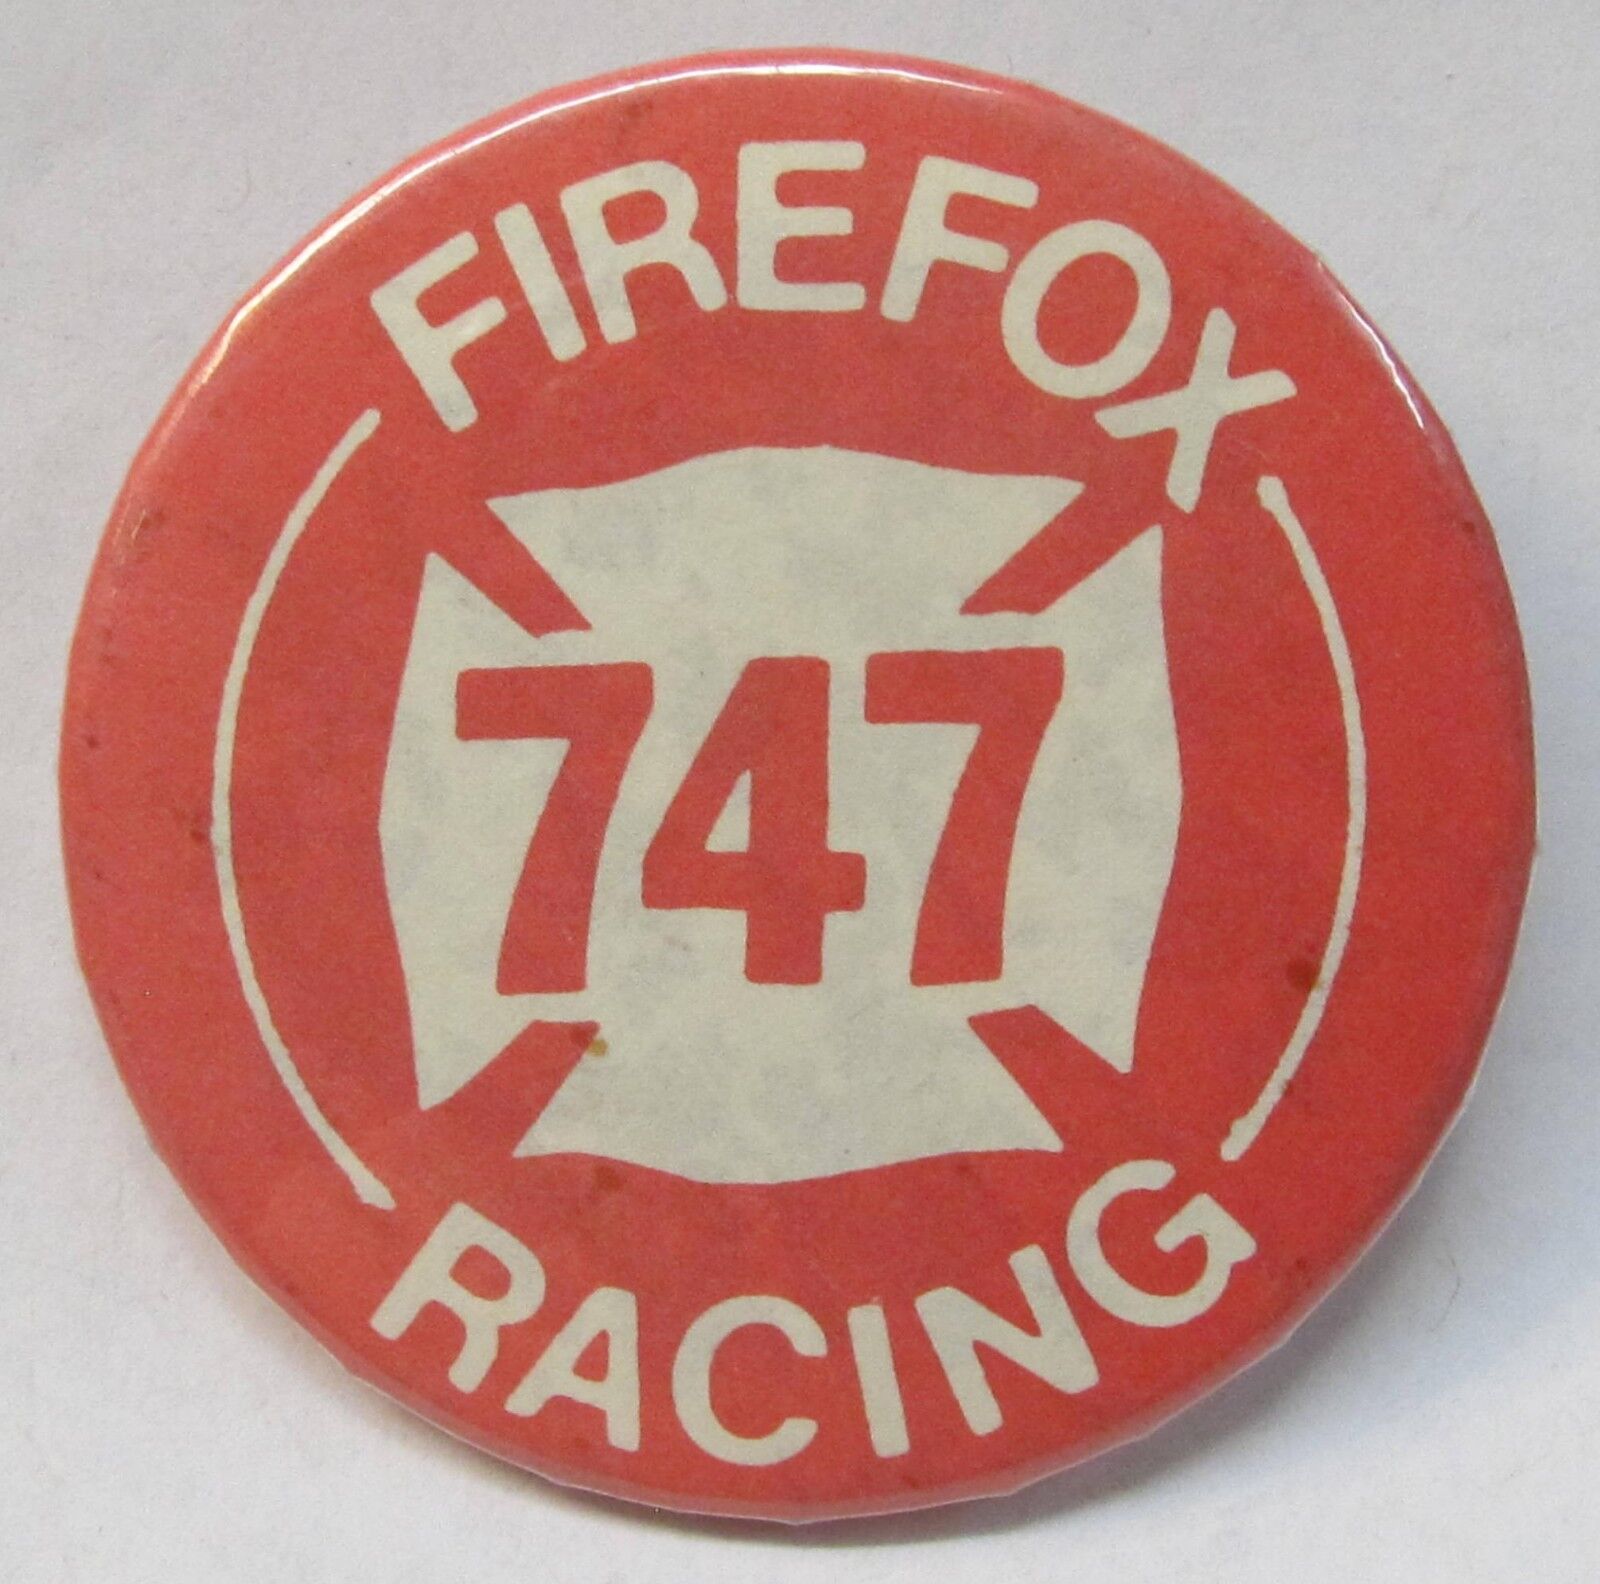 FIREFOX 747 RACING Offshore Hydroplane boat pinback button WHITE ON RED